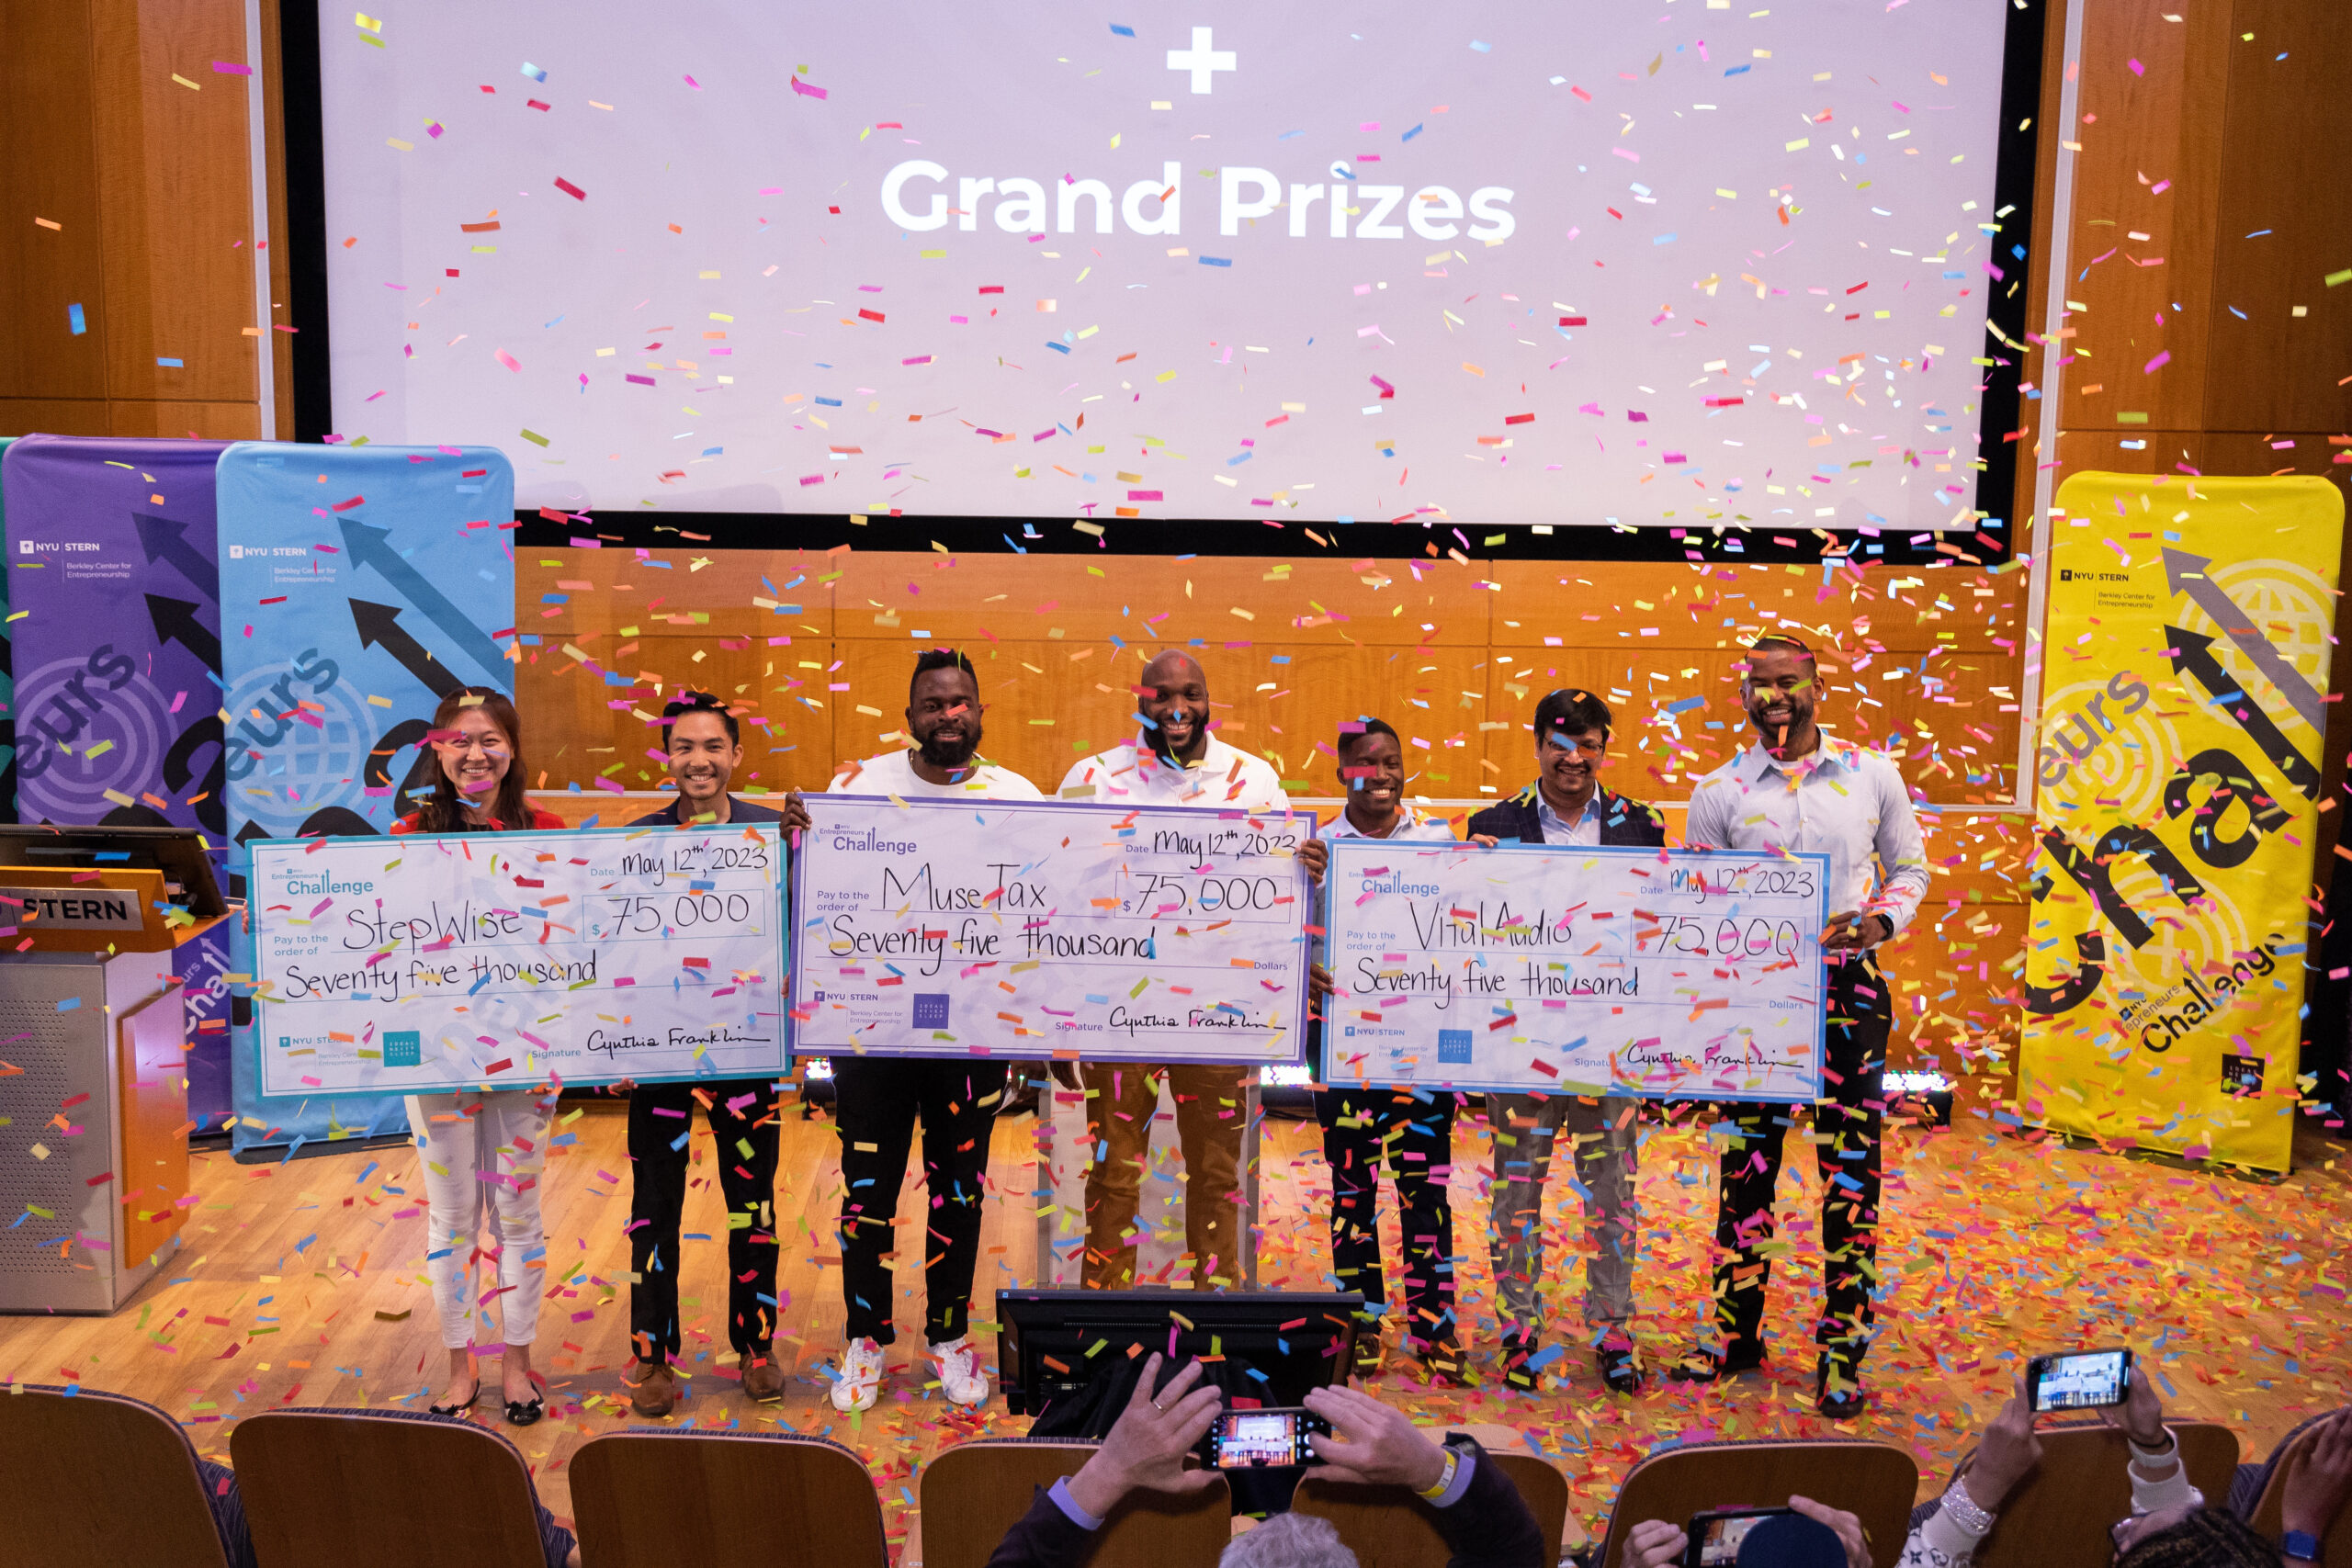 Group - Grand Prize